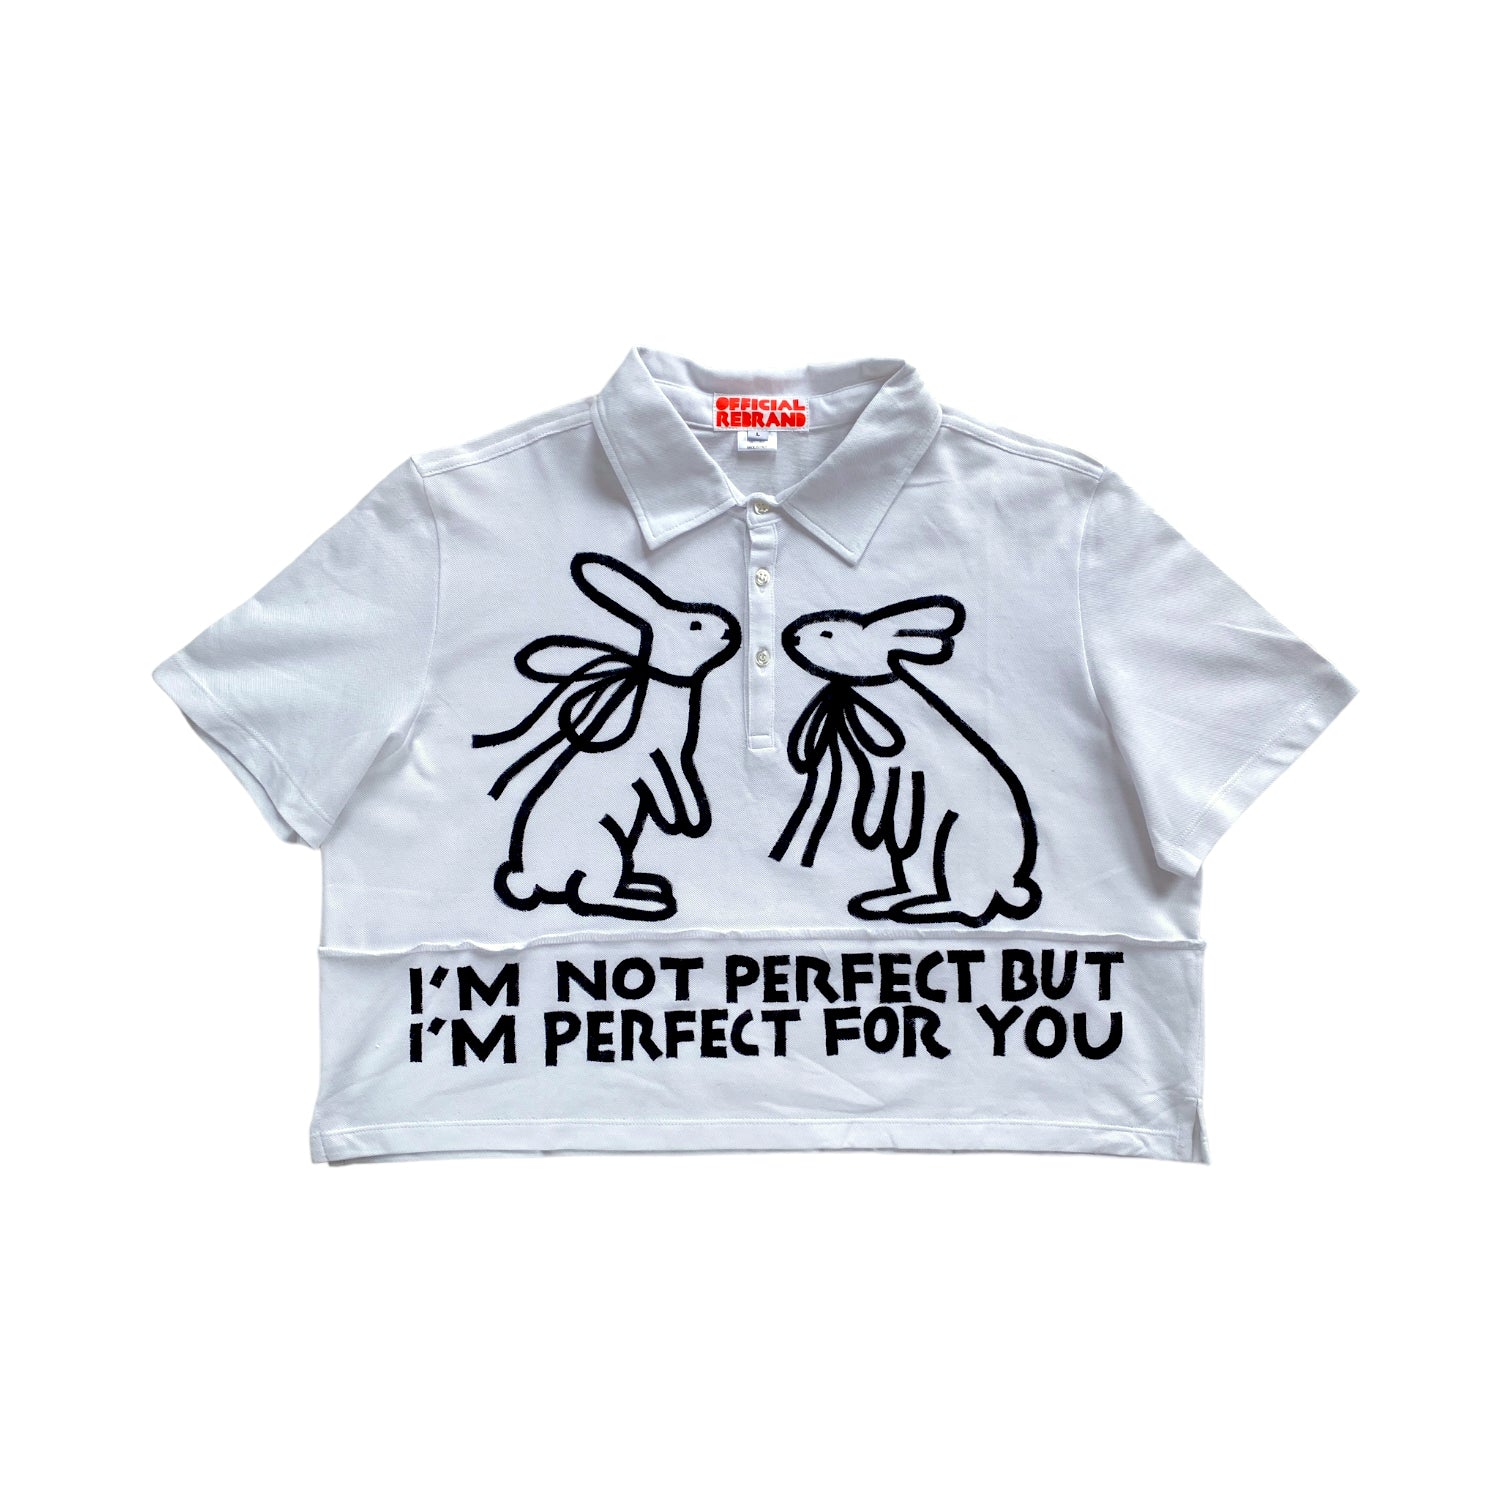 cropped white collared polo shirt with two black hand painted rabbits facing each other and black text reading I'M NOT PERFECT BUT I'M PERFECT FOR YOU